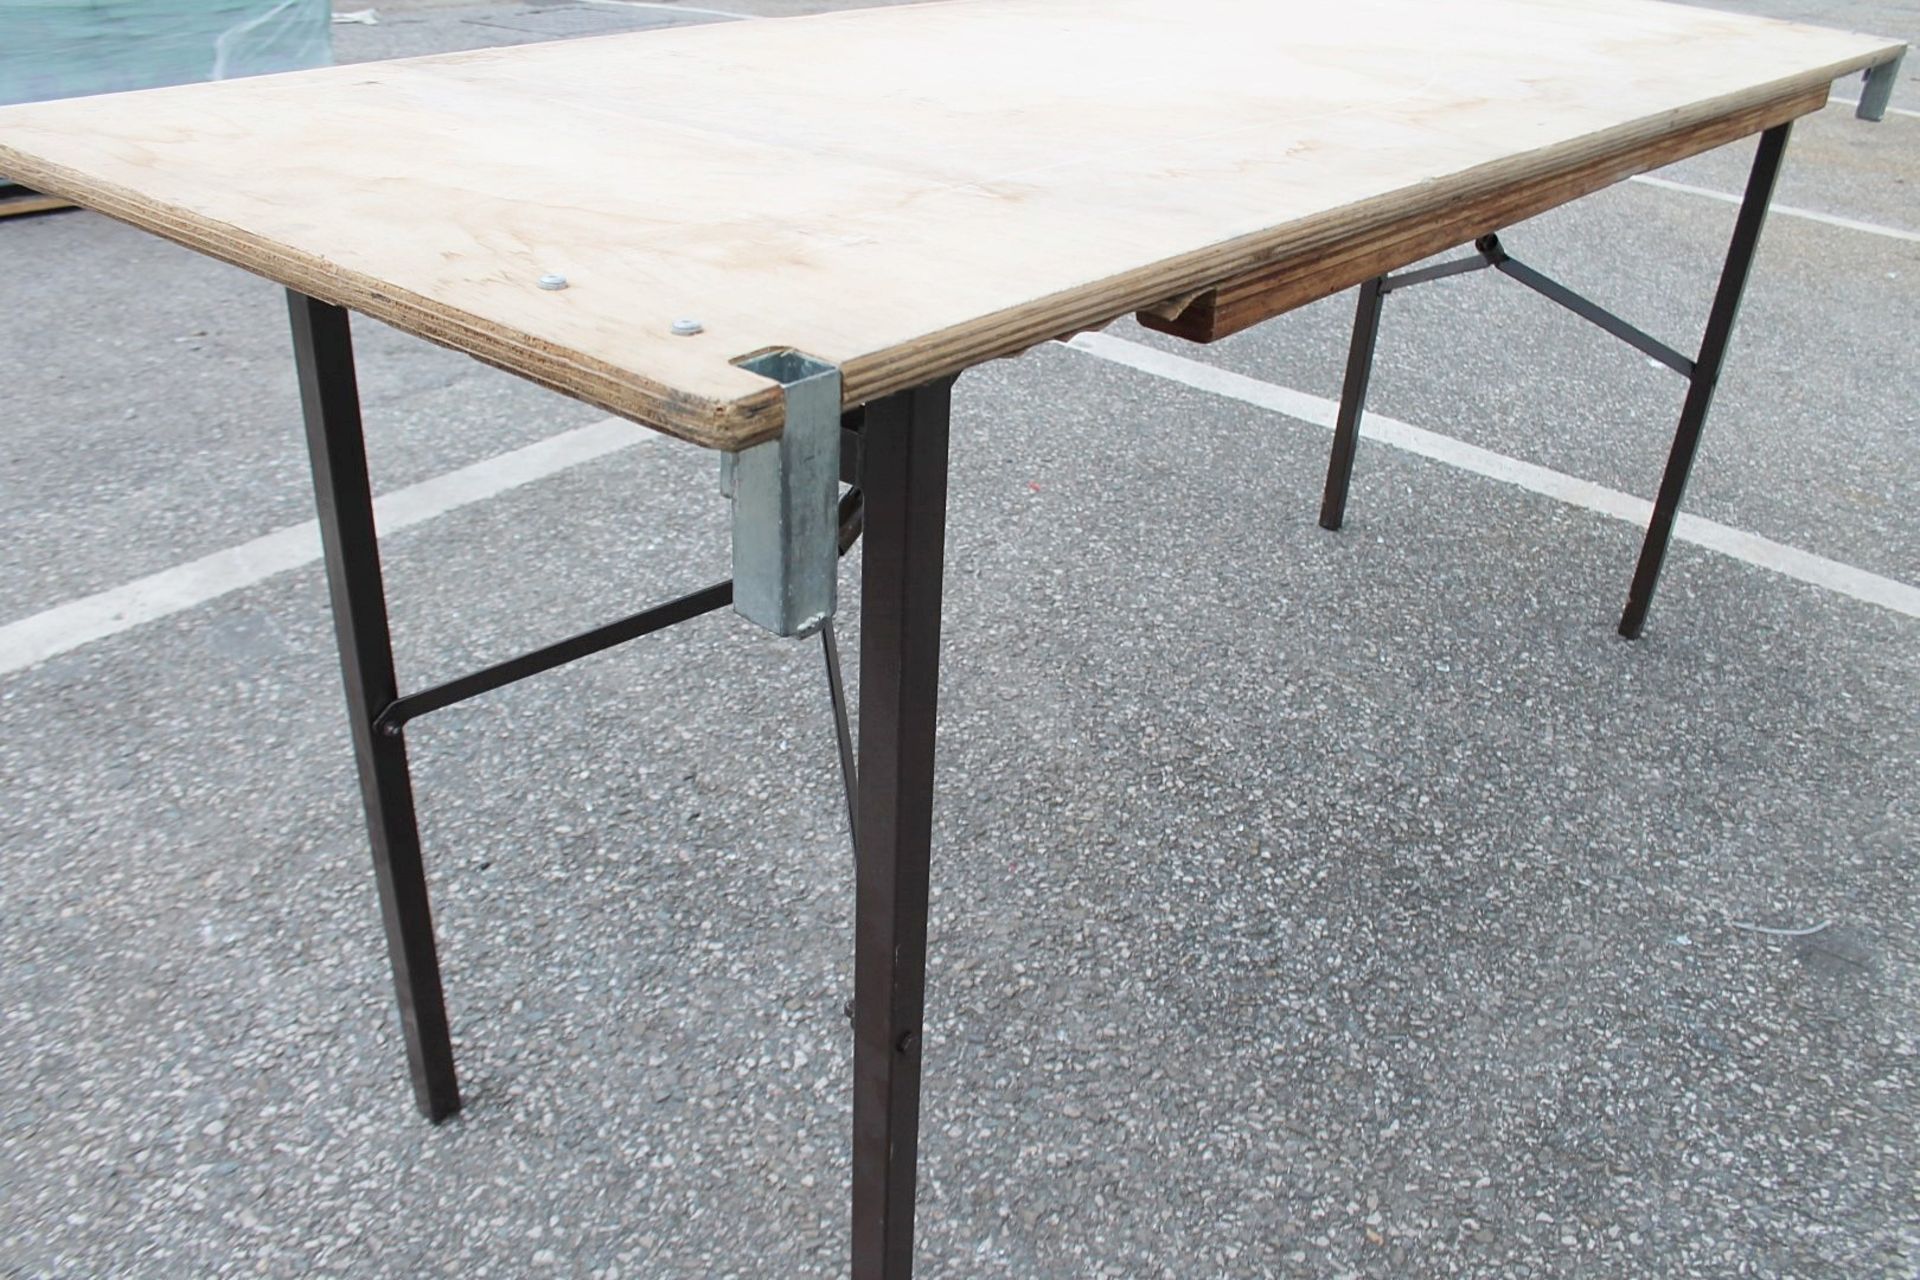 10 x Folding 6ft Wooden Topped Rectangular Trestle Tables - Recently Removed From A Well-known - Image 6 of 6